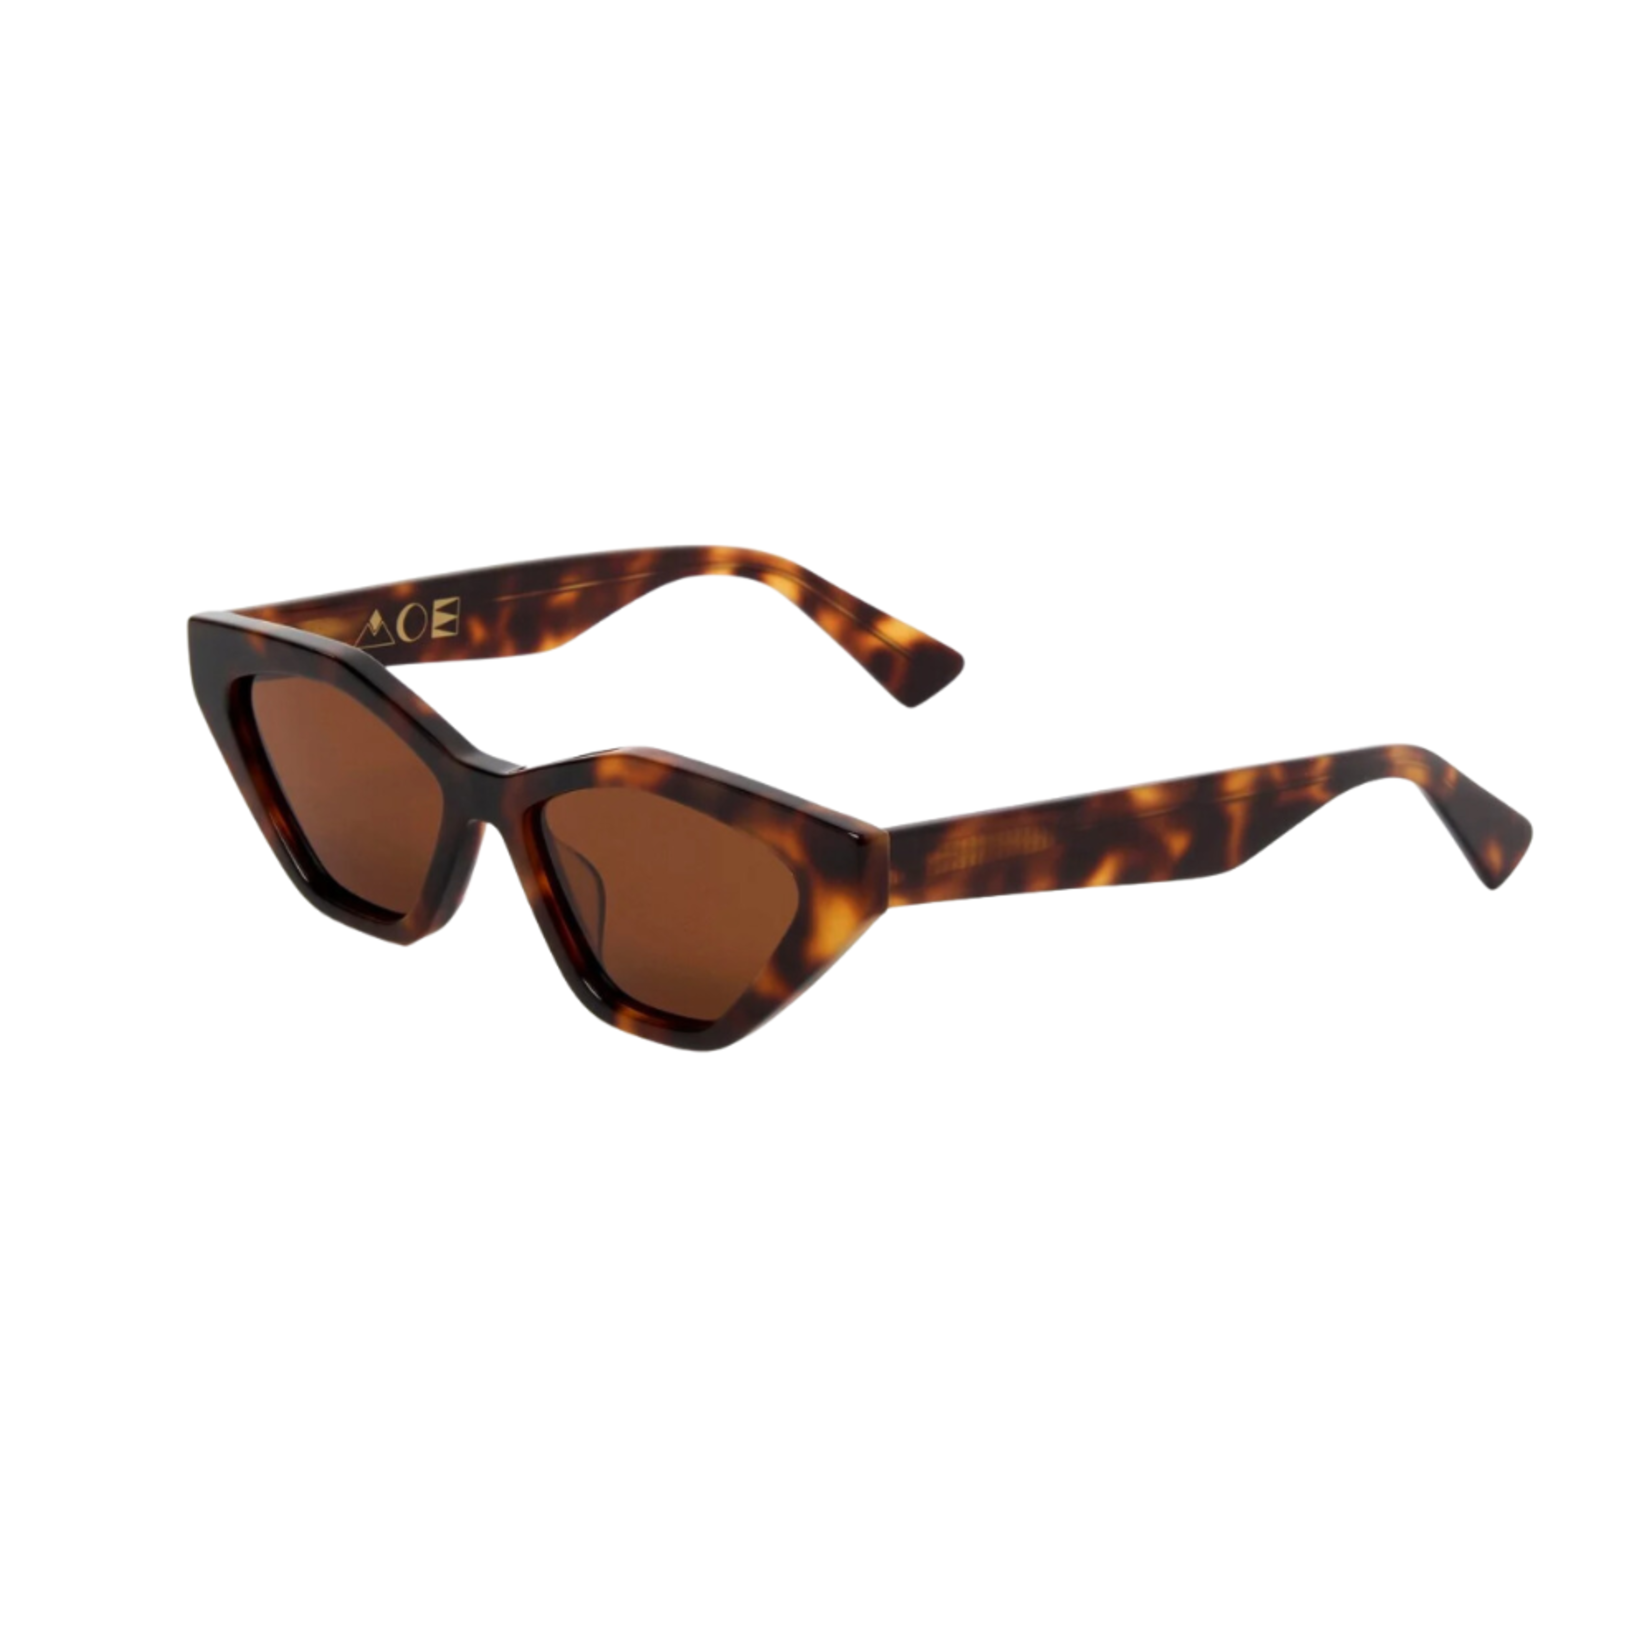 Arms of Eve Jagger Sunglasses Tortoise